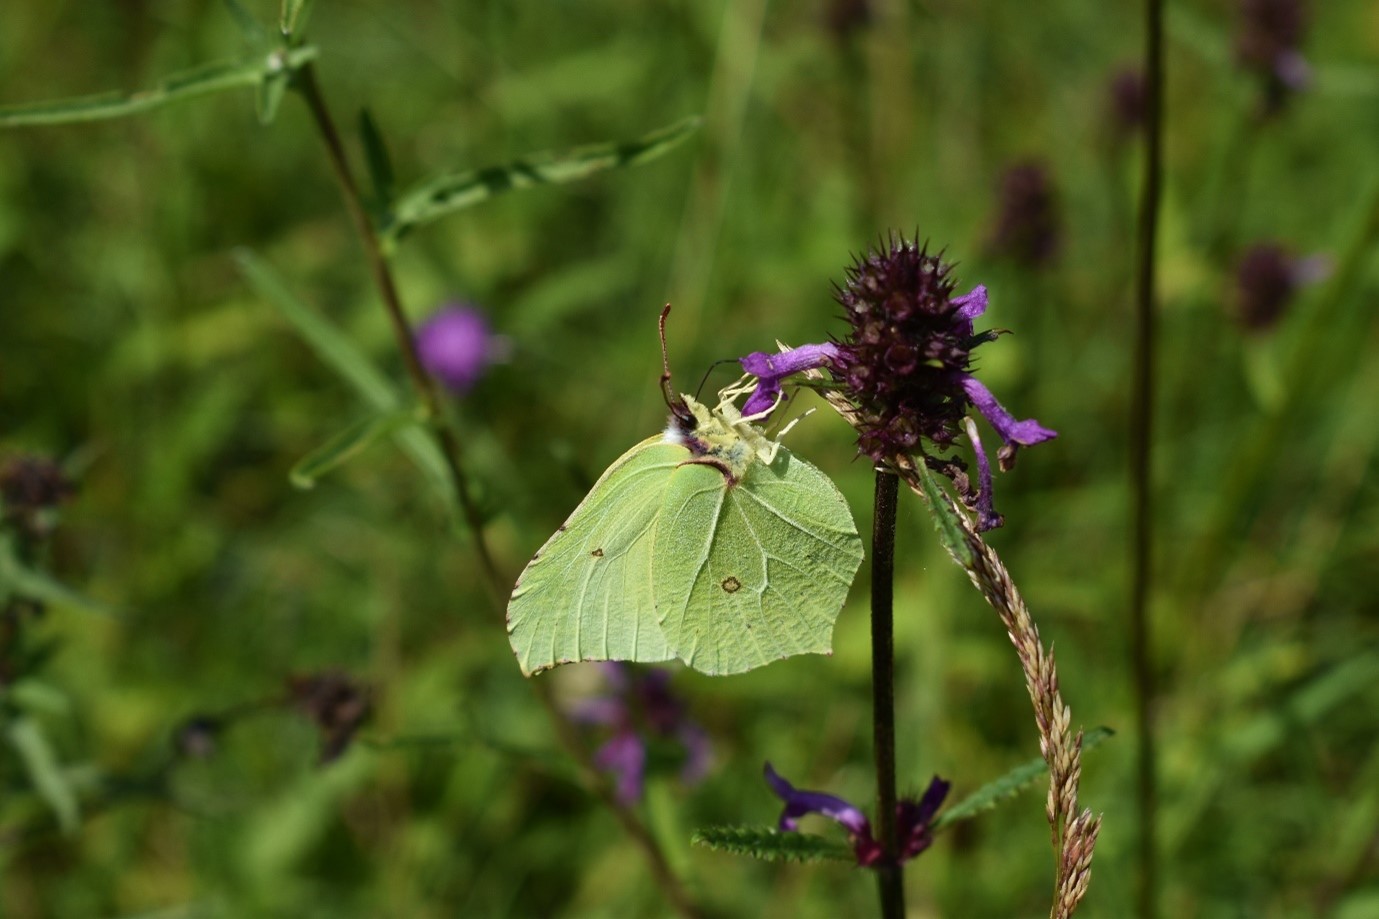 A Brimstone butterfly with its wings adapted to look like a leaf